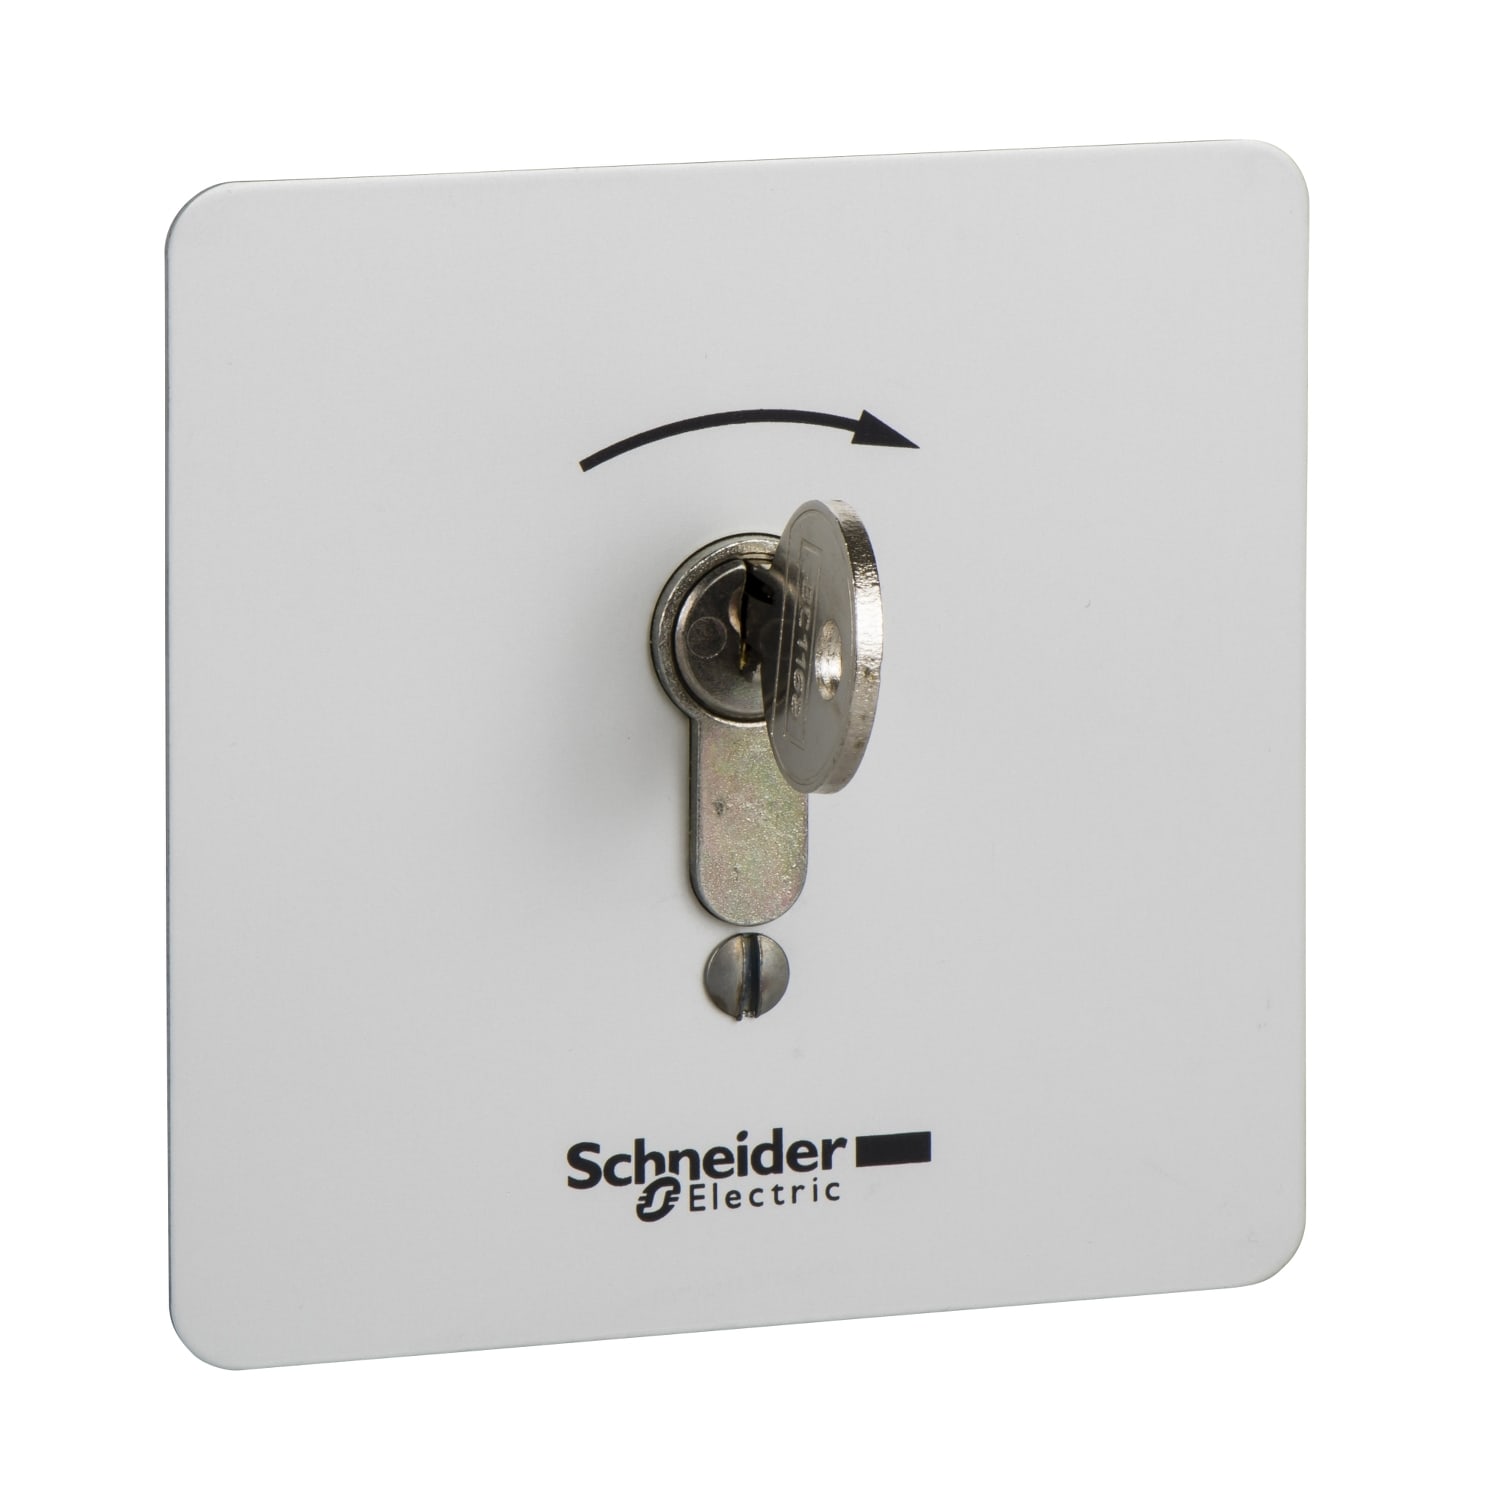 Schneider Electric - Harmony XAPS - boite a boutons - encastrable - inviolable - a serrure